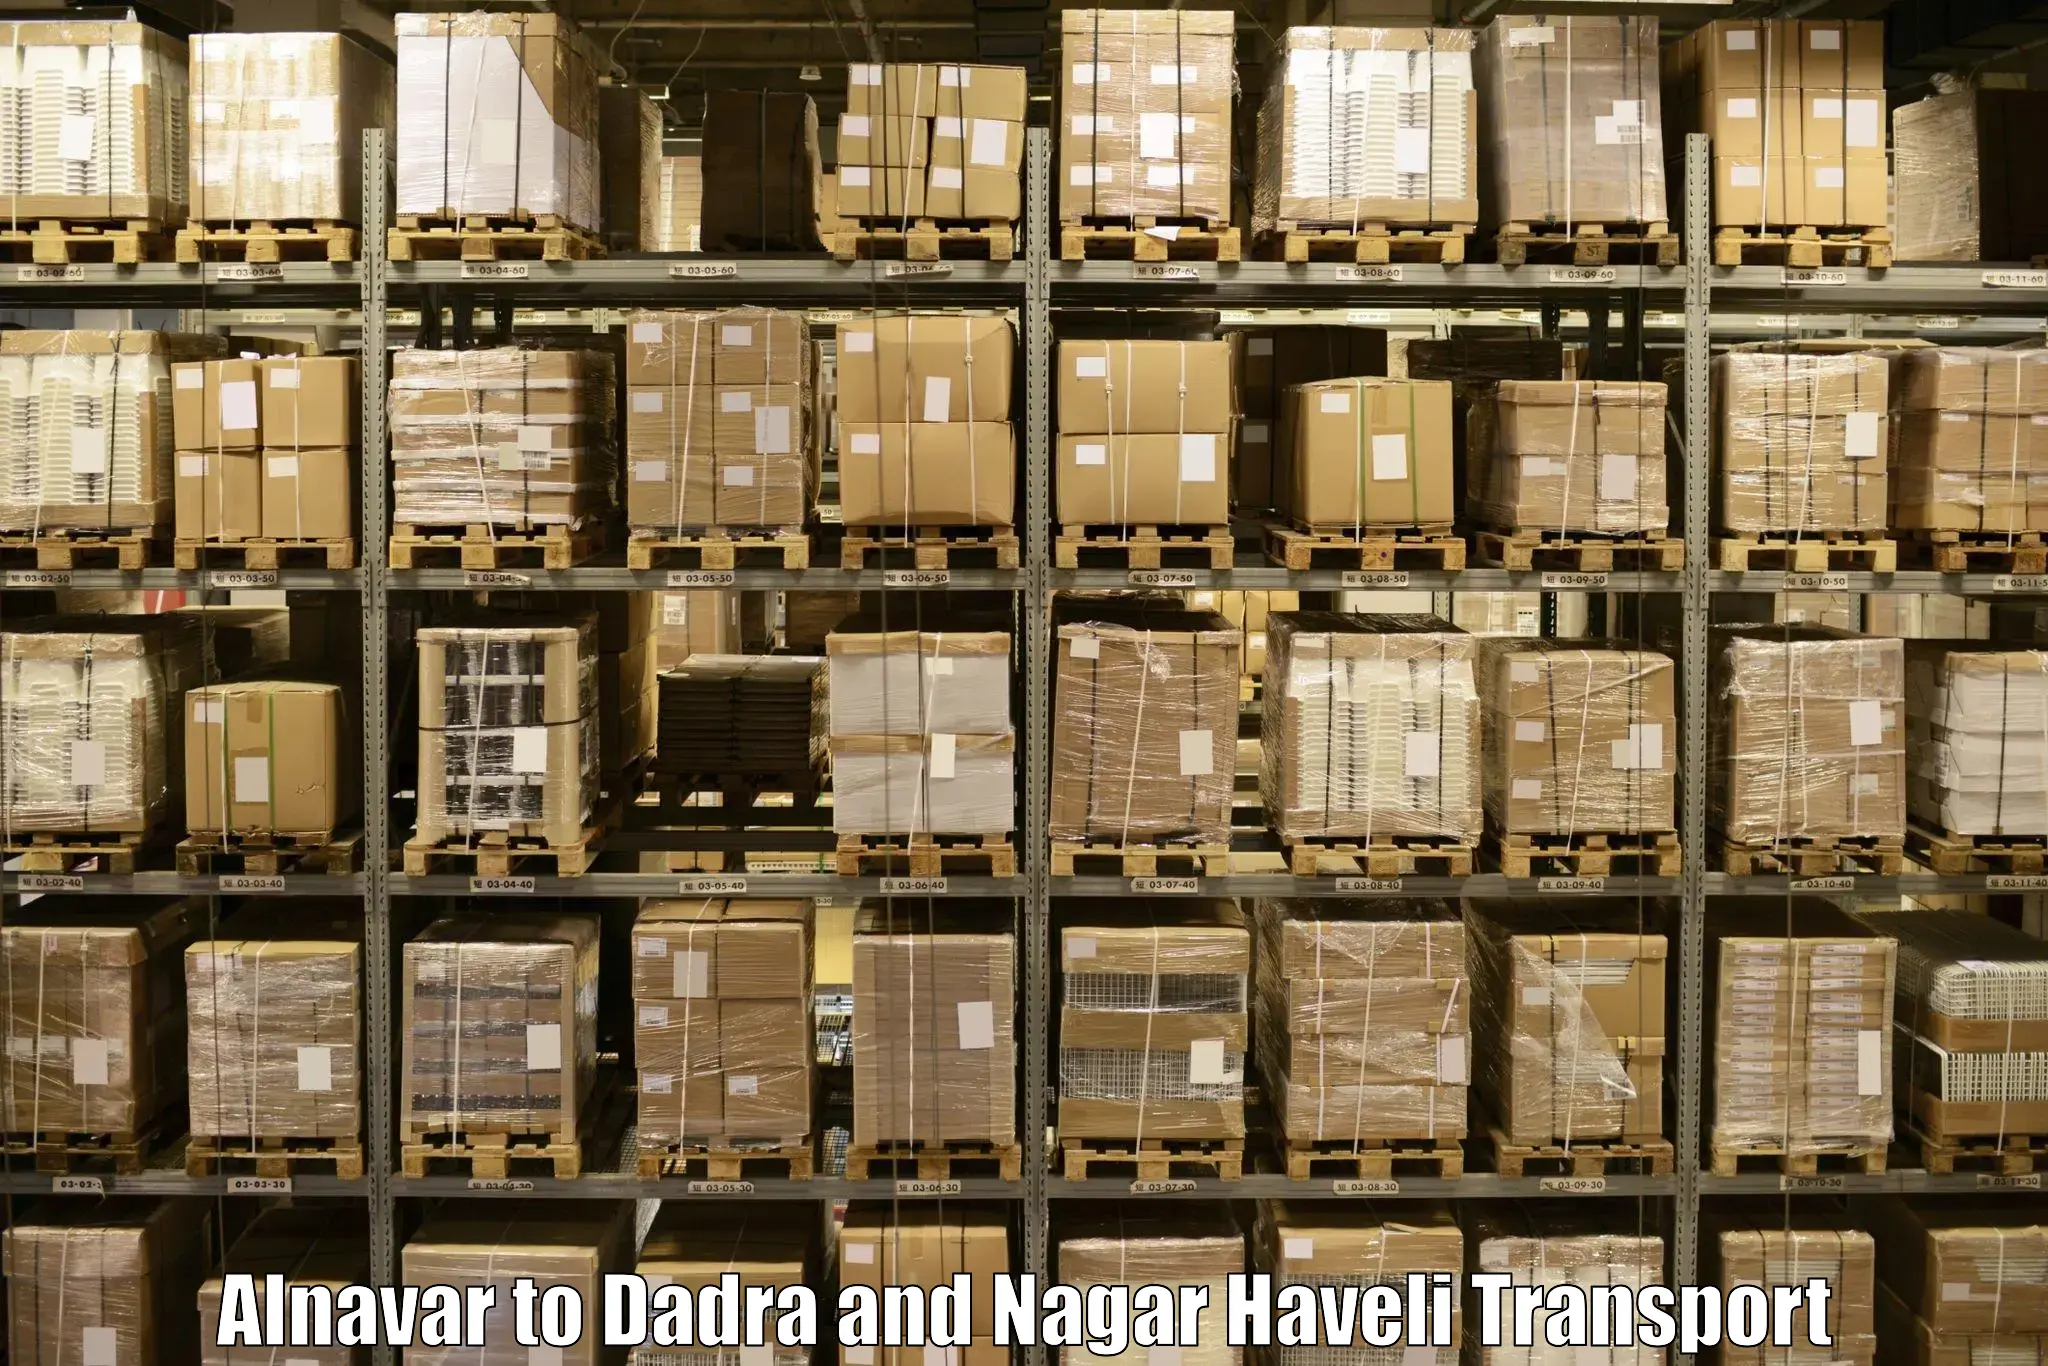 Air freight transport services in Alnavar to Dadra and Nagar Haveli